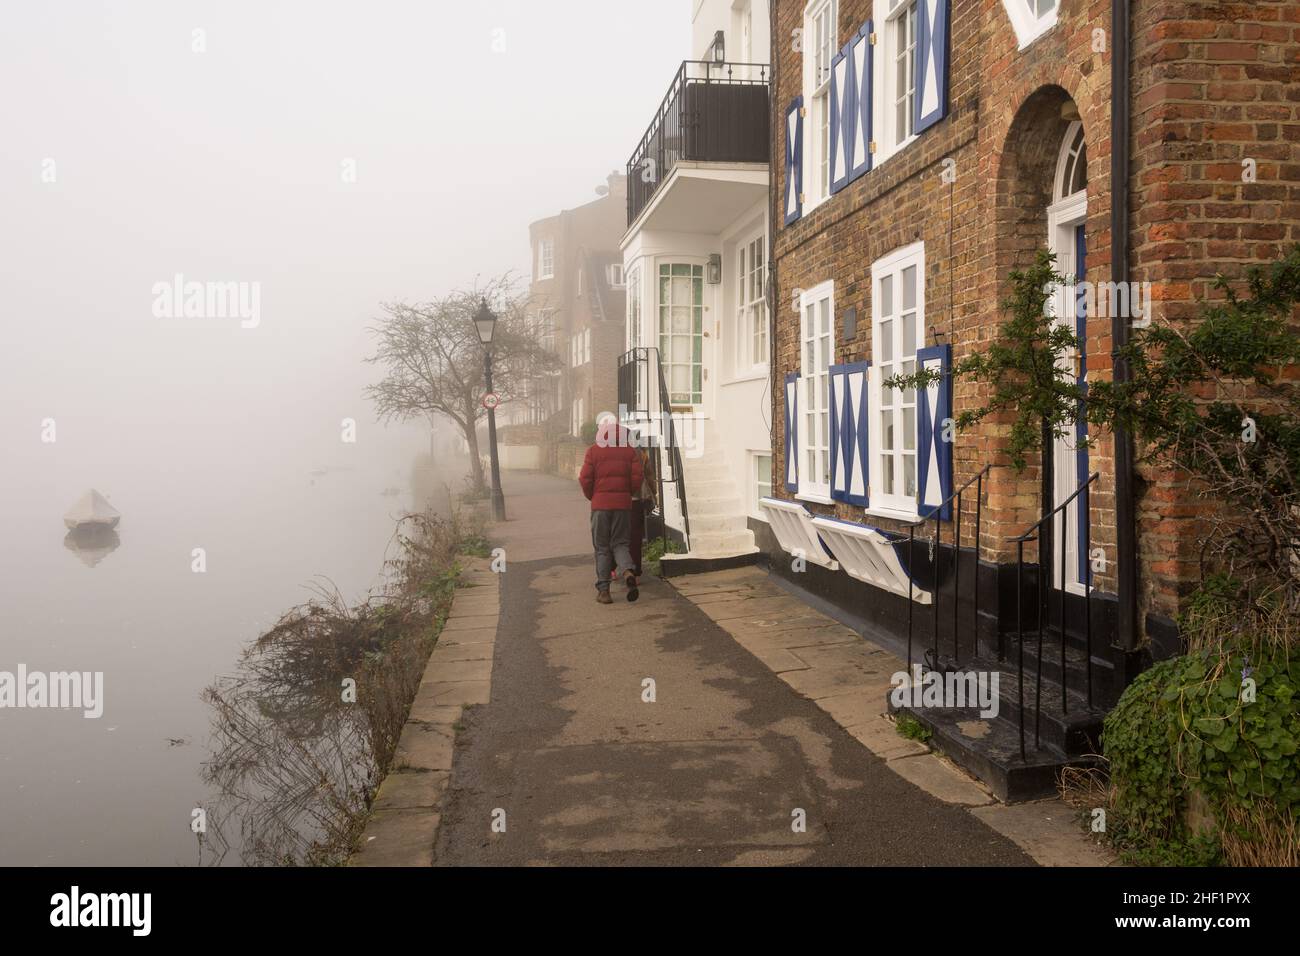 The Dutch House at Strand-on-the-Green, Chiswick, enveloped in dense fog on the banks of the River Thames, London, England, U.K. Stock Photo